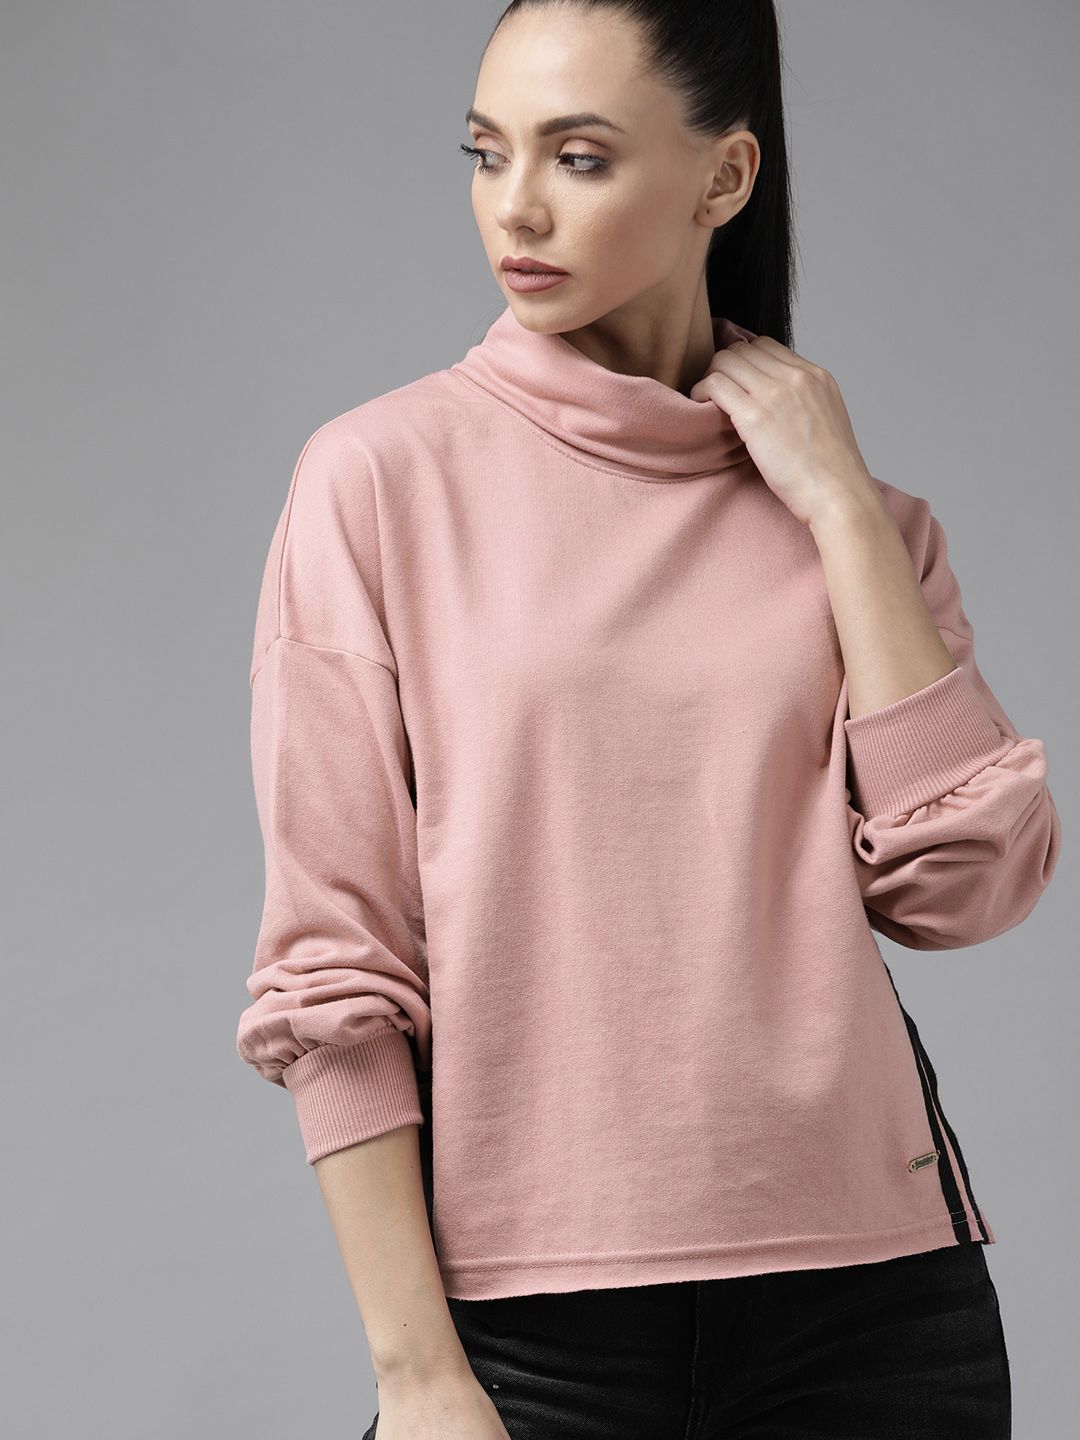 Roadster Women Pink Solid Sweatshirt with Contrast Side Taping Price in India